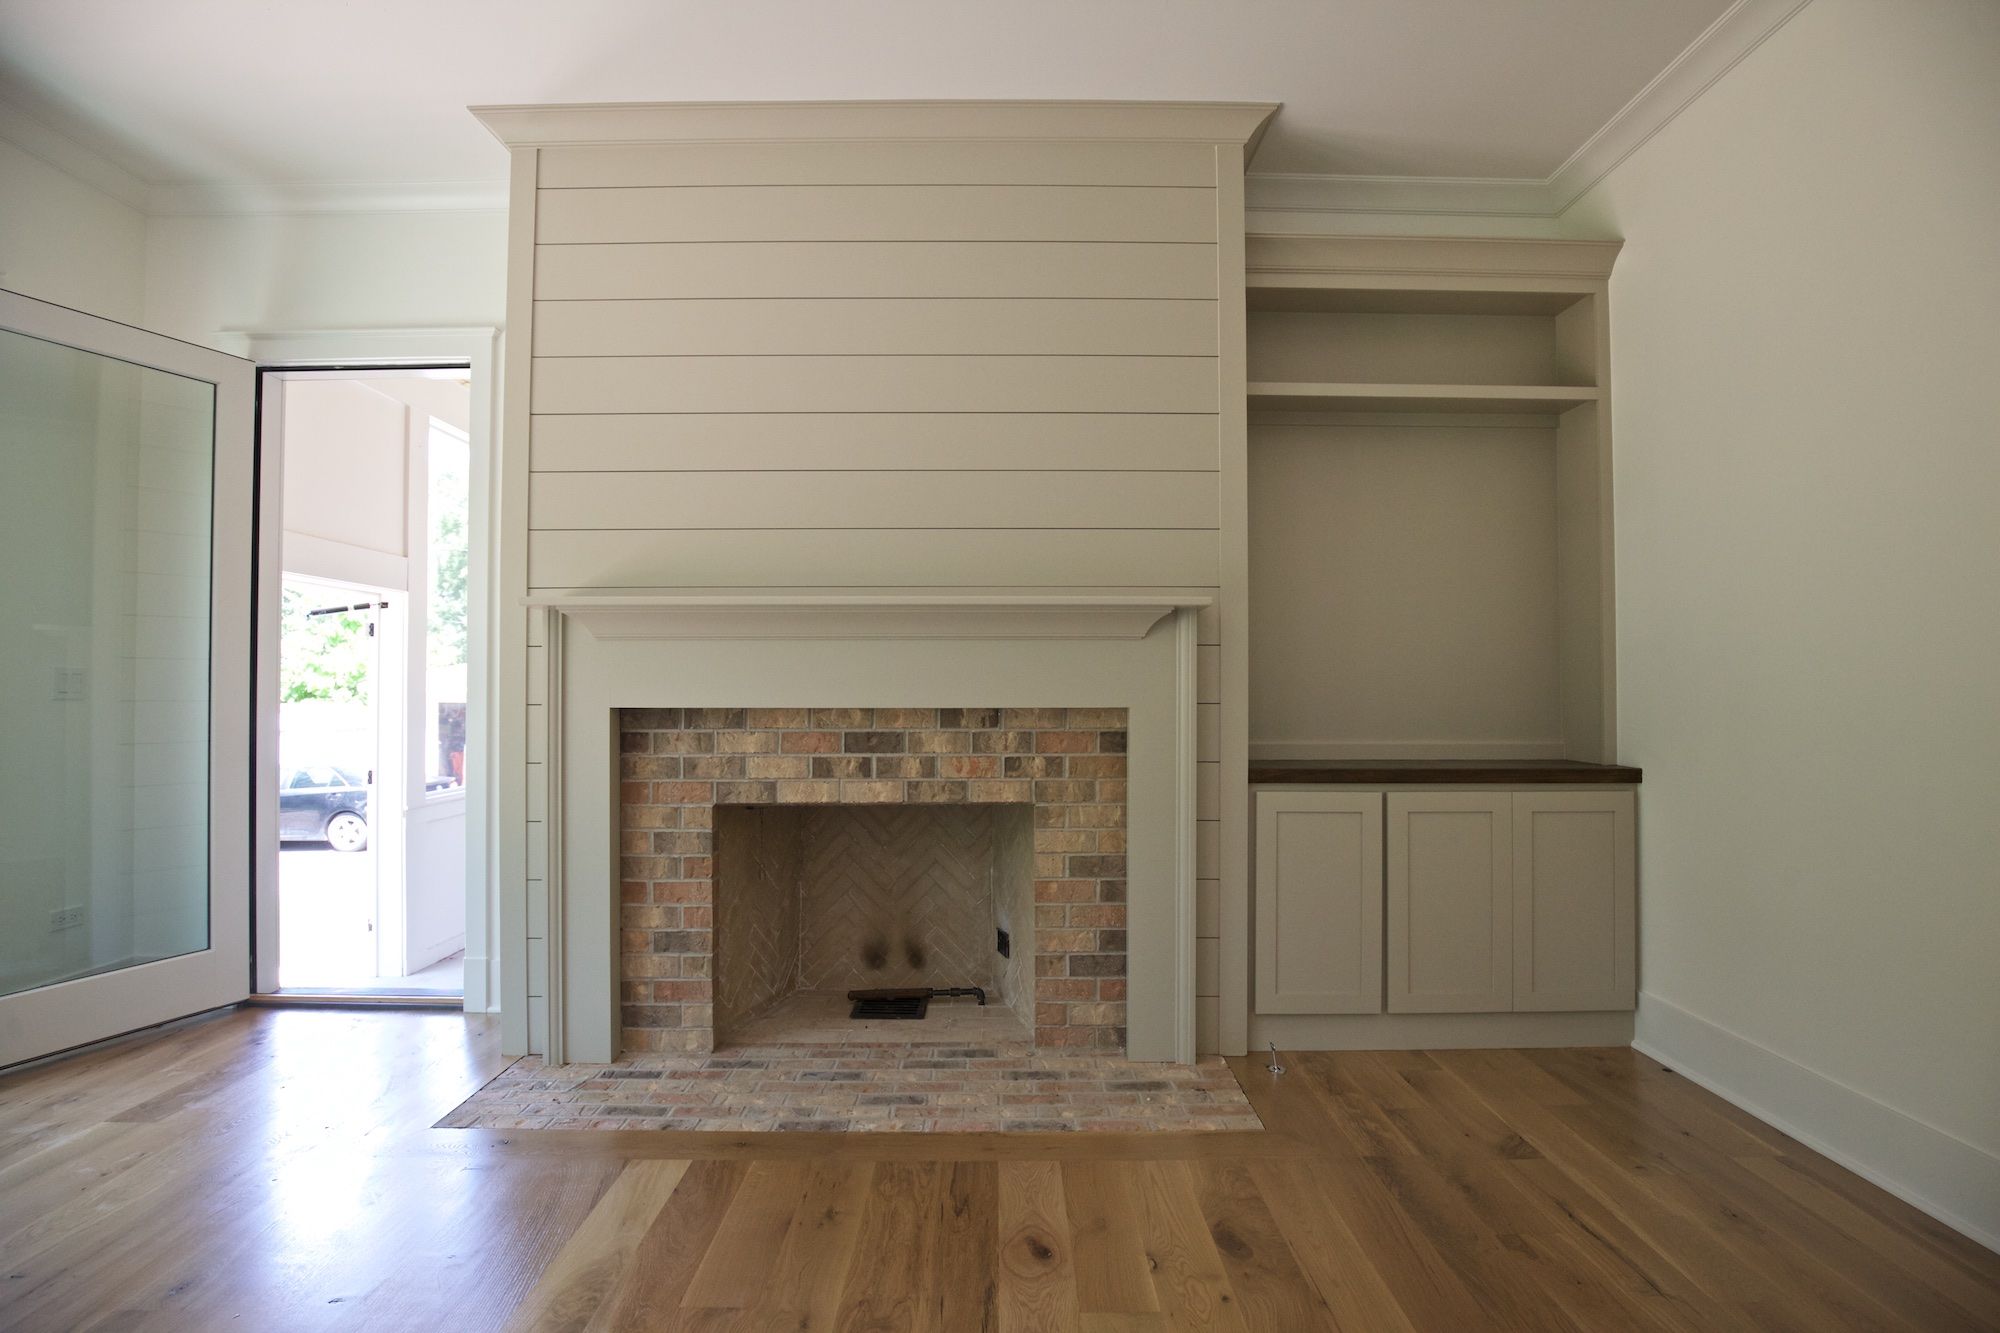 Fireplace Trim Unique Shiplap Fireplace Surround In Family Room